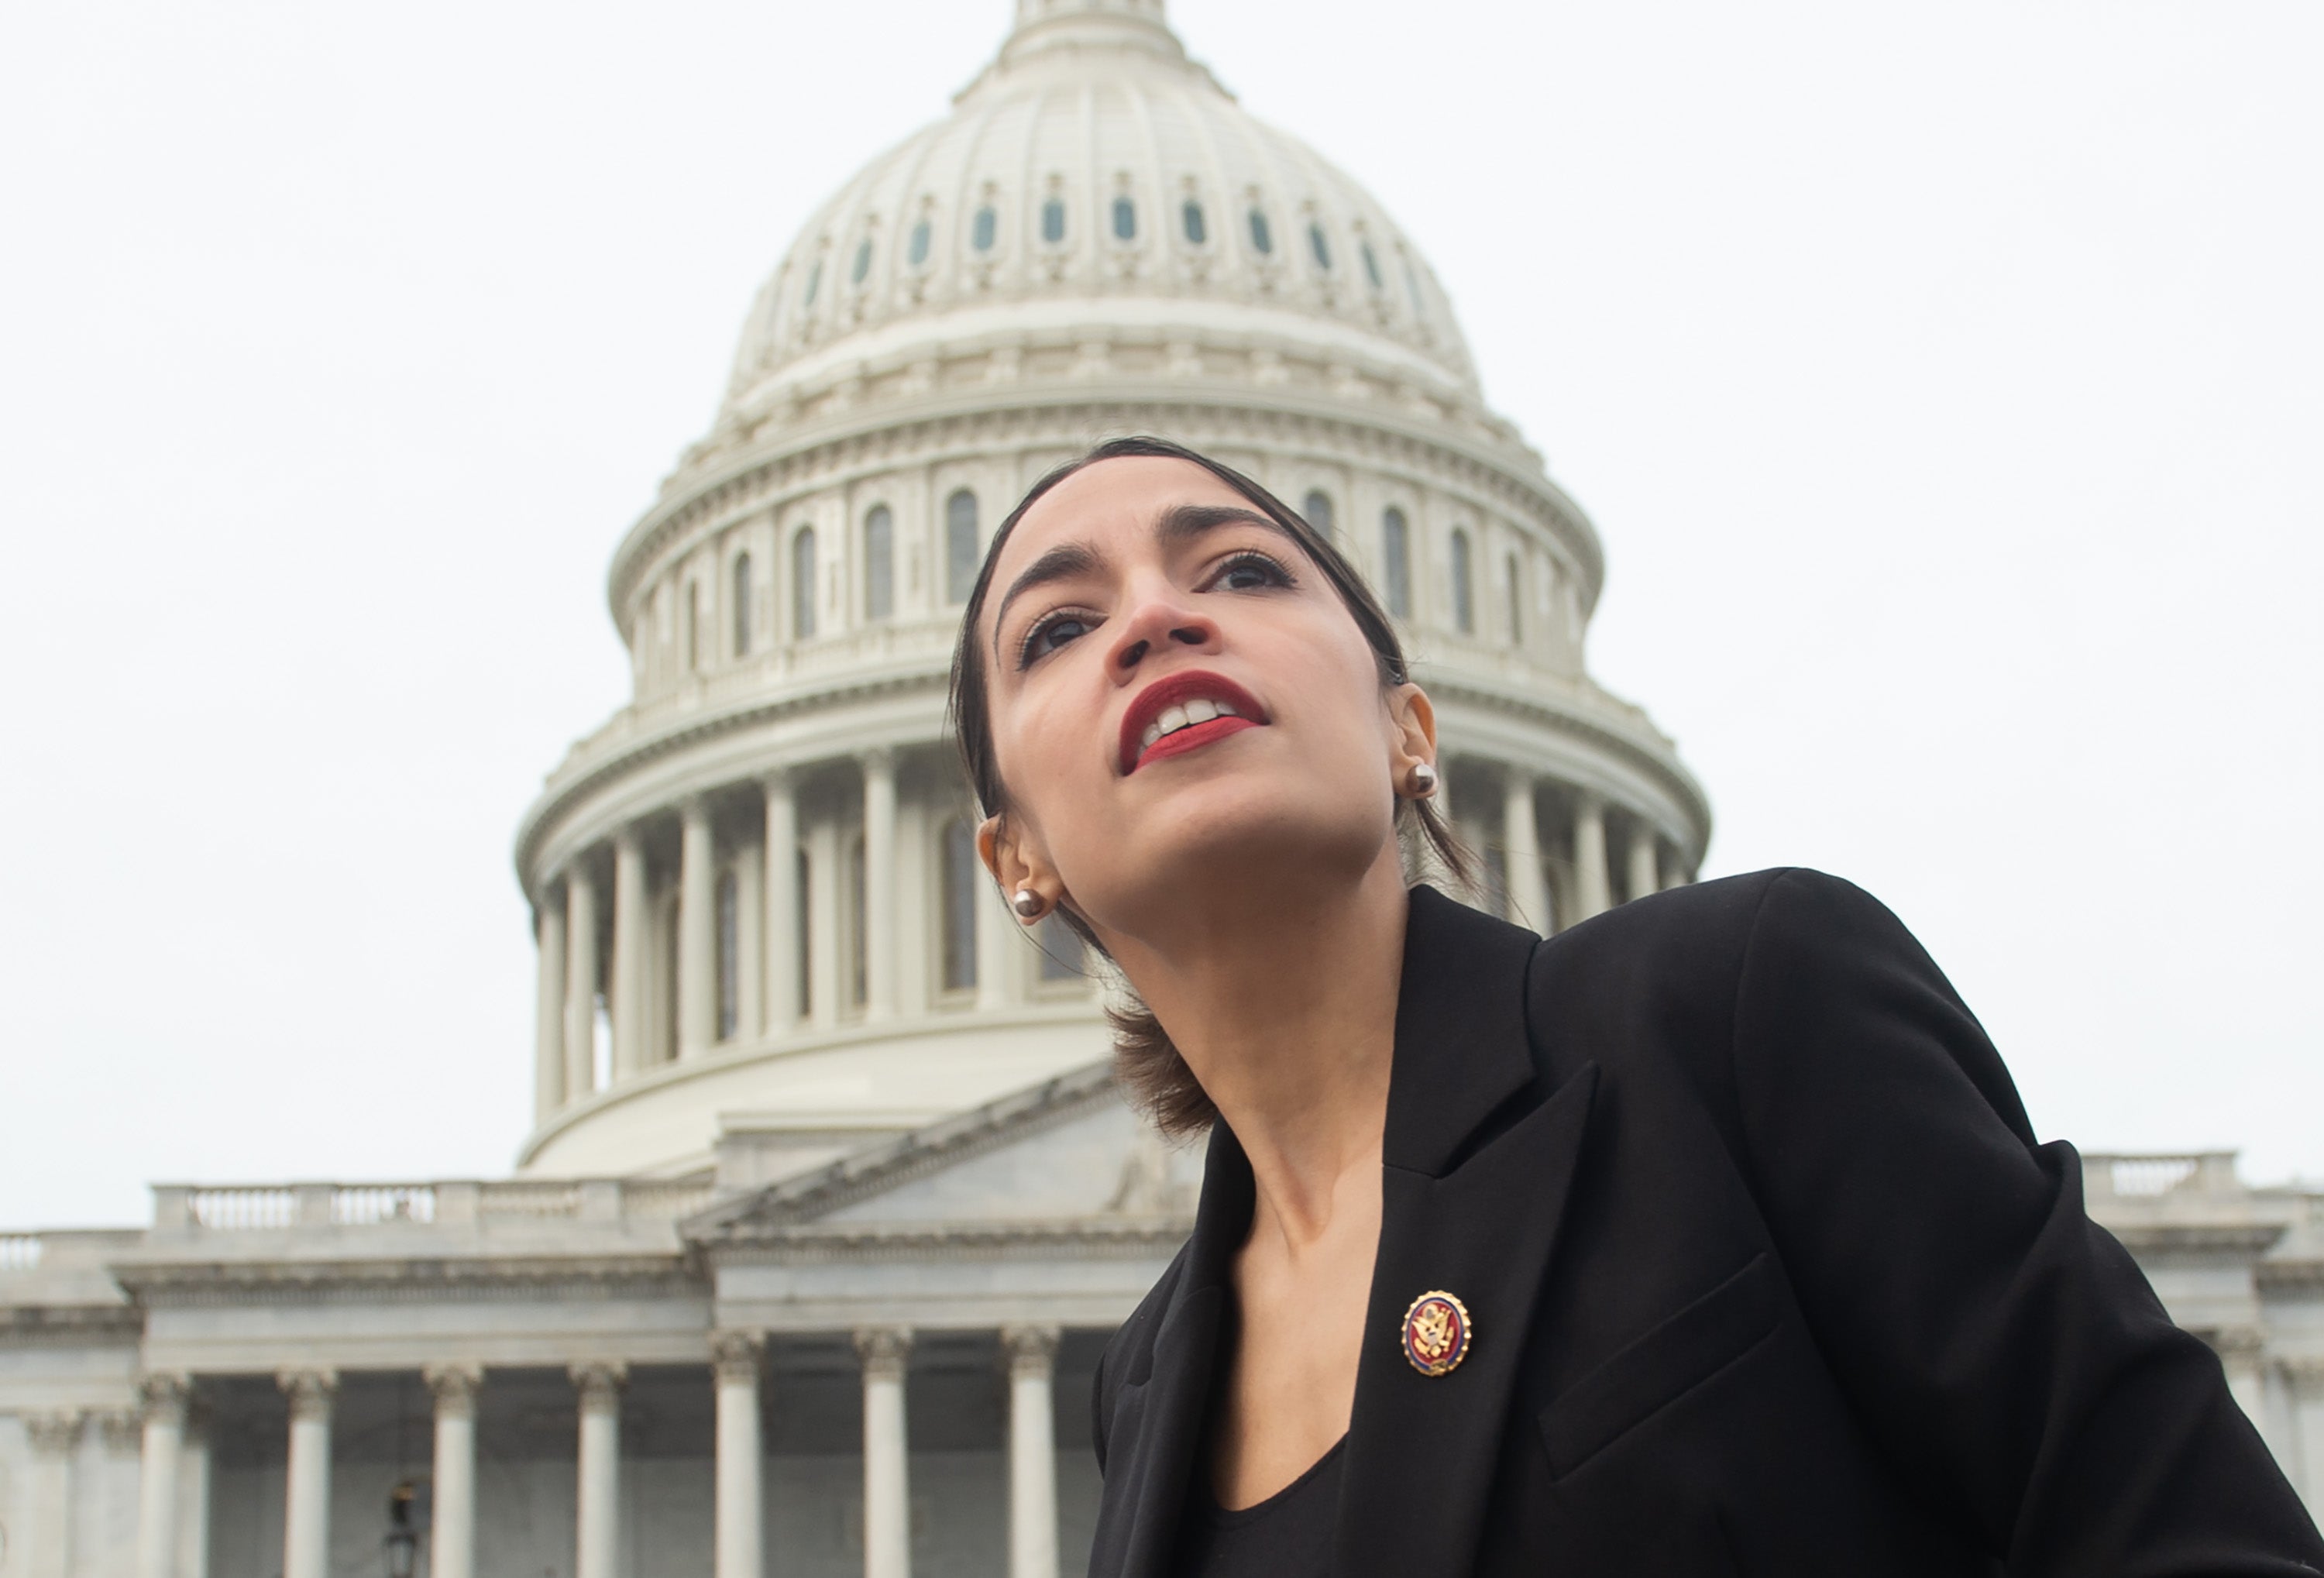 AOC has made it clear that she supports canceling student debt